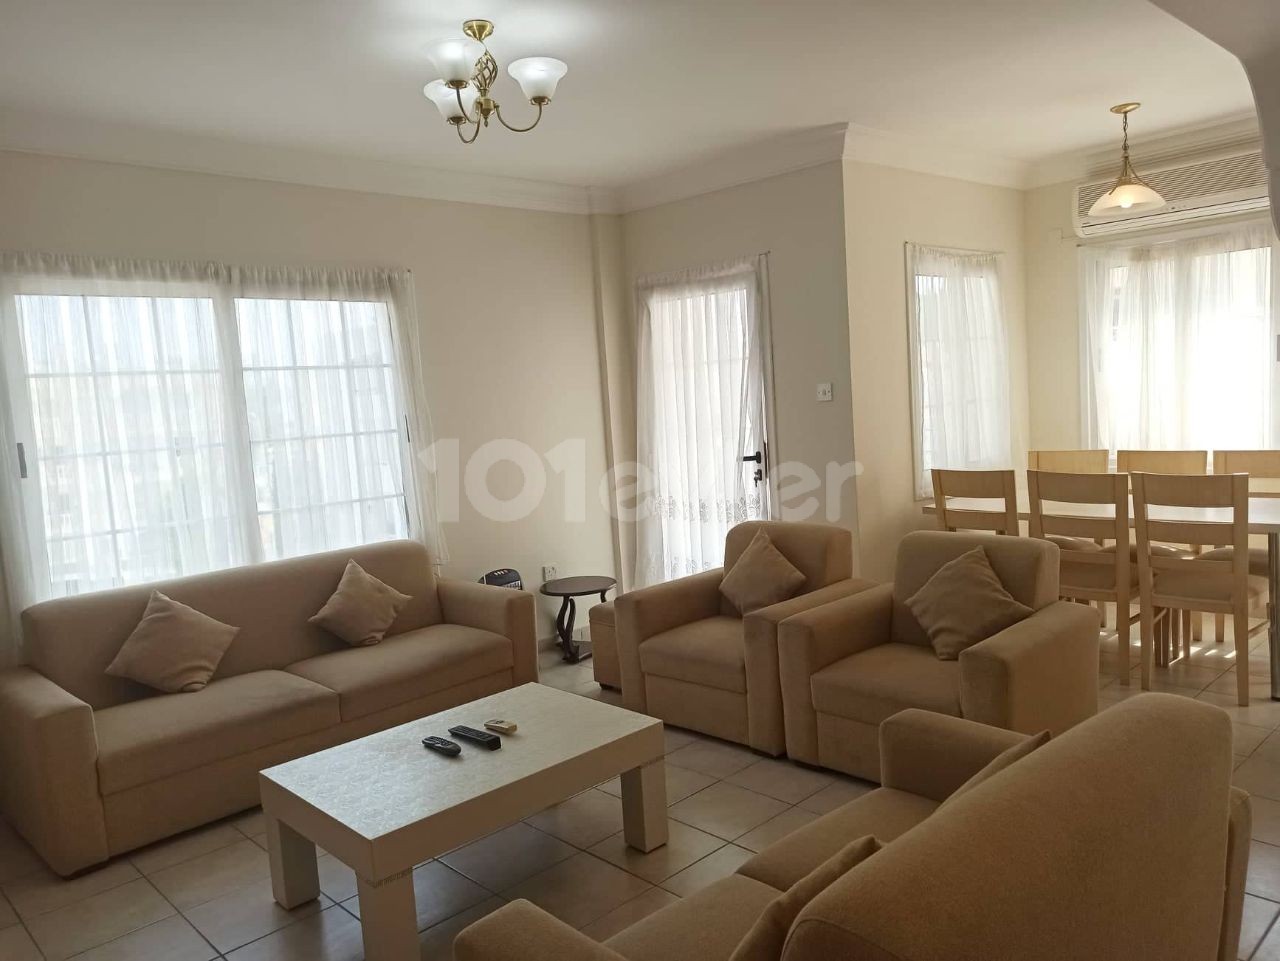 Very Large 3 Bedroom Apartment (140 Square Meters) - In This Popular Area Of The City 